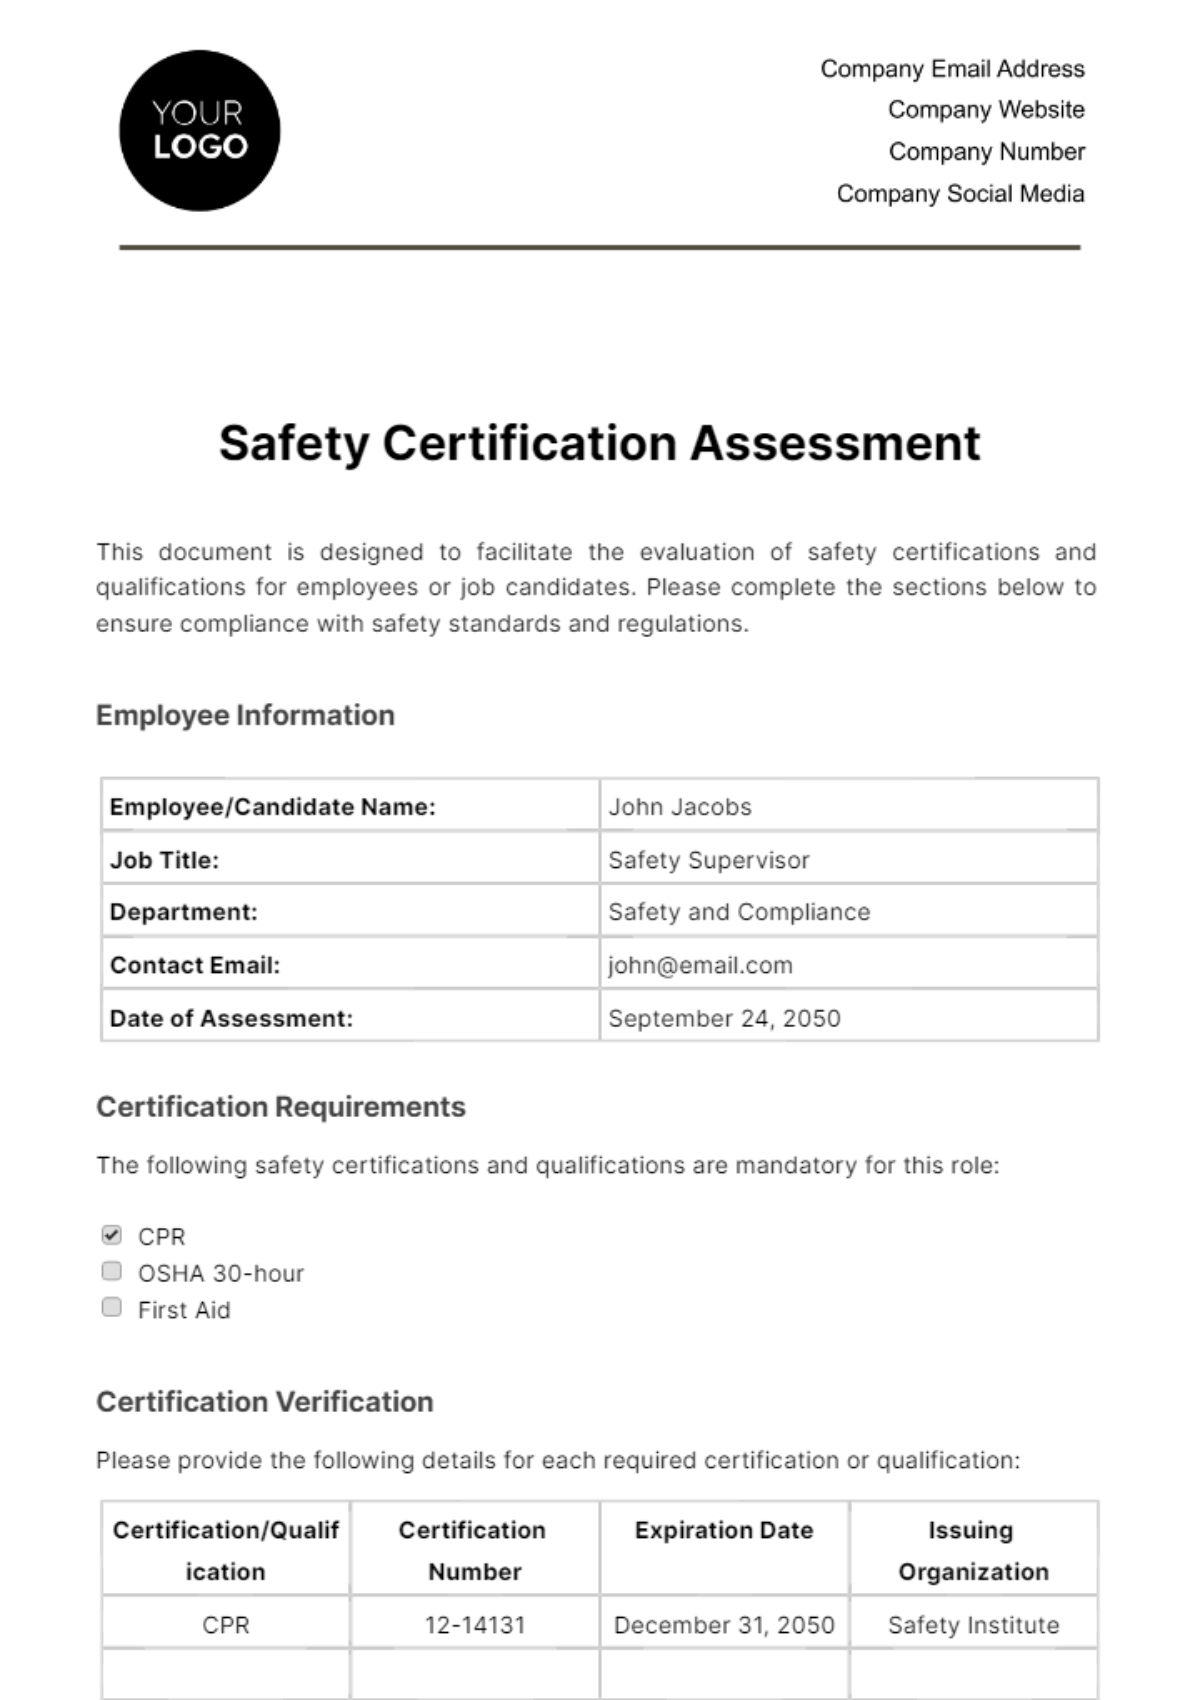 Free Safety Certification Assessment HR Template